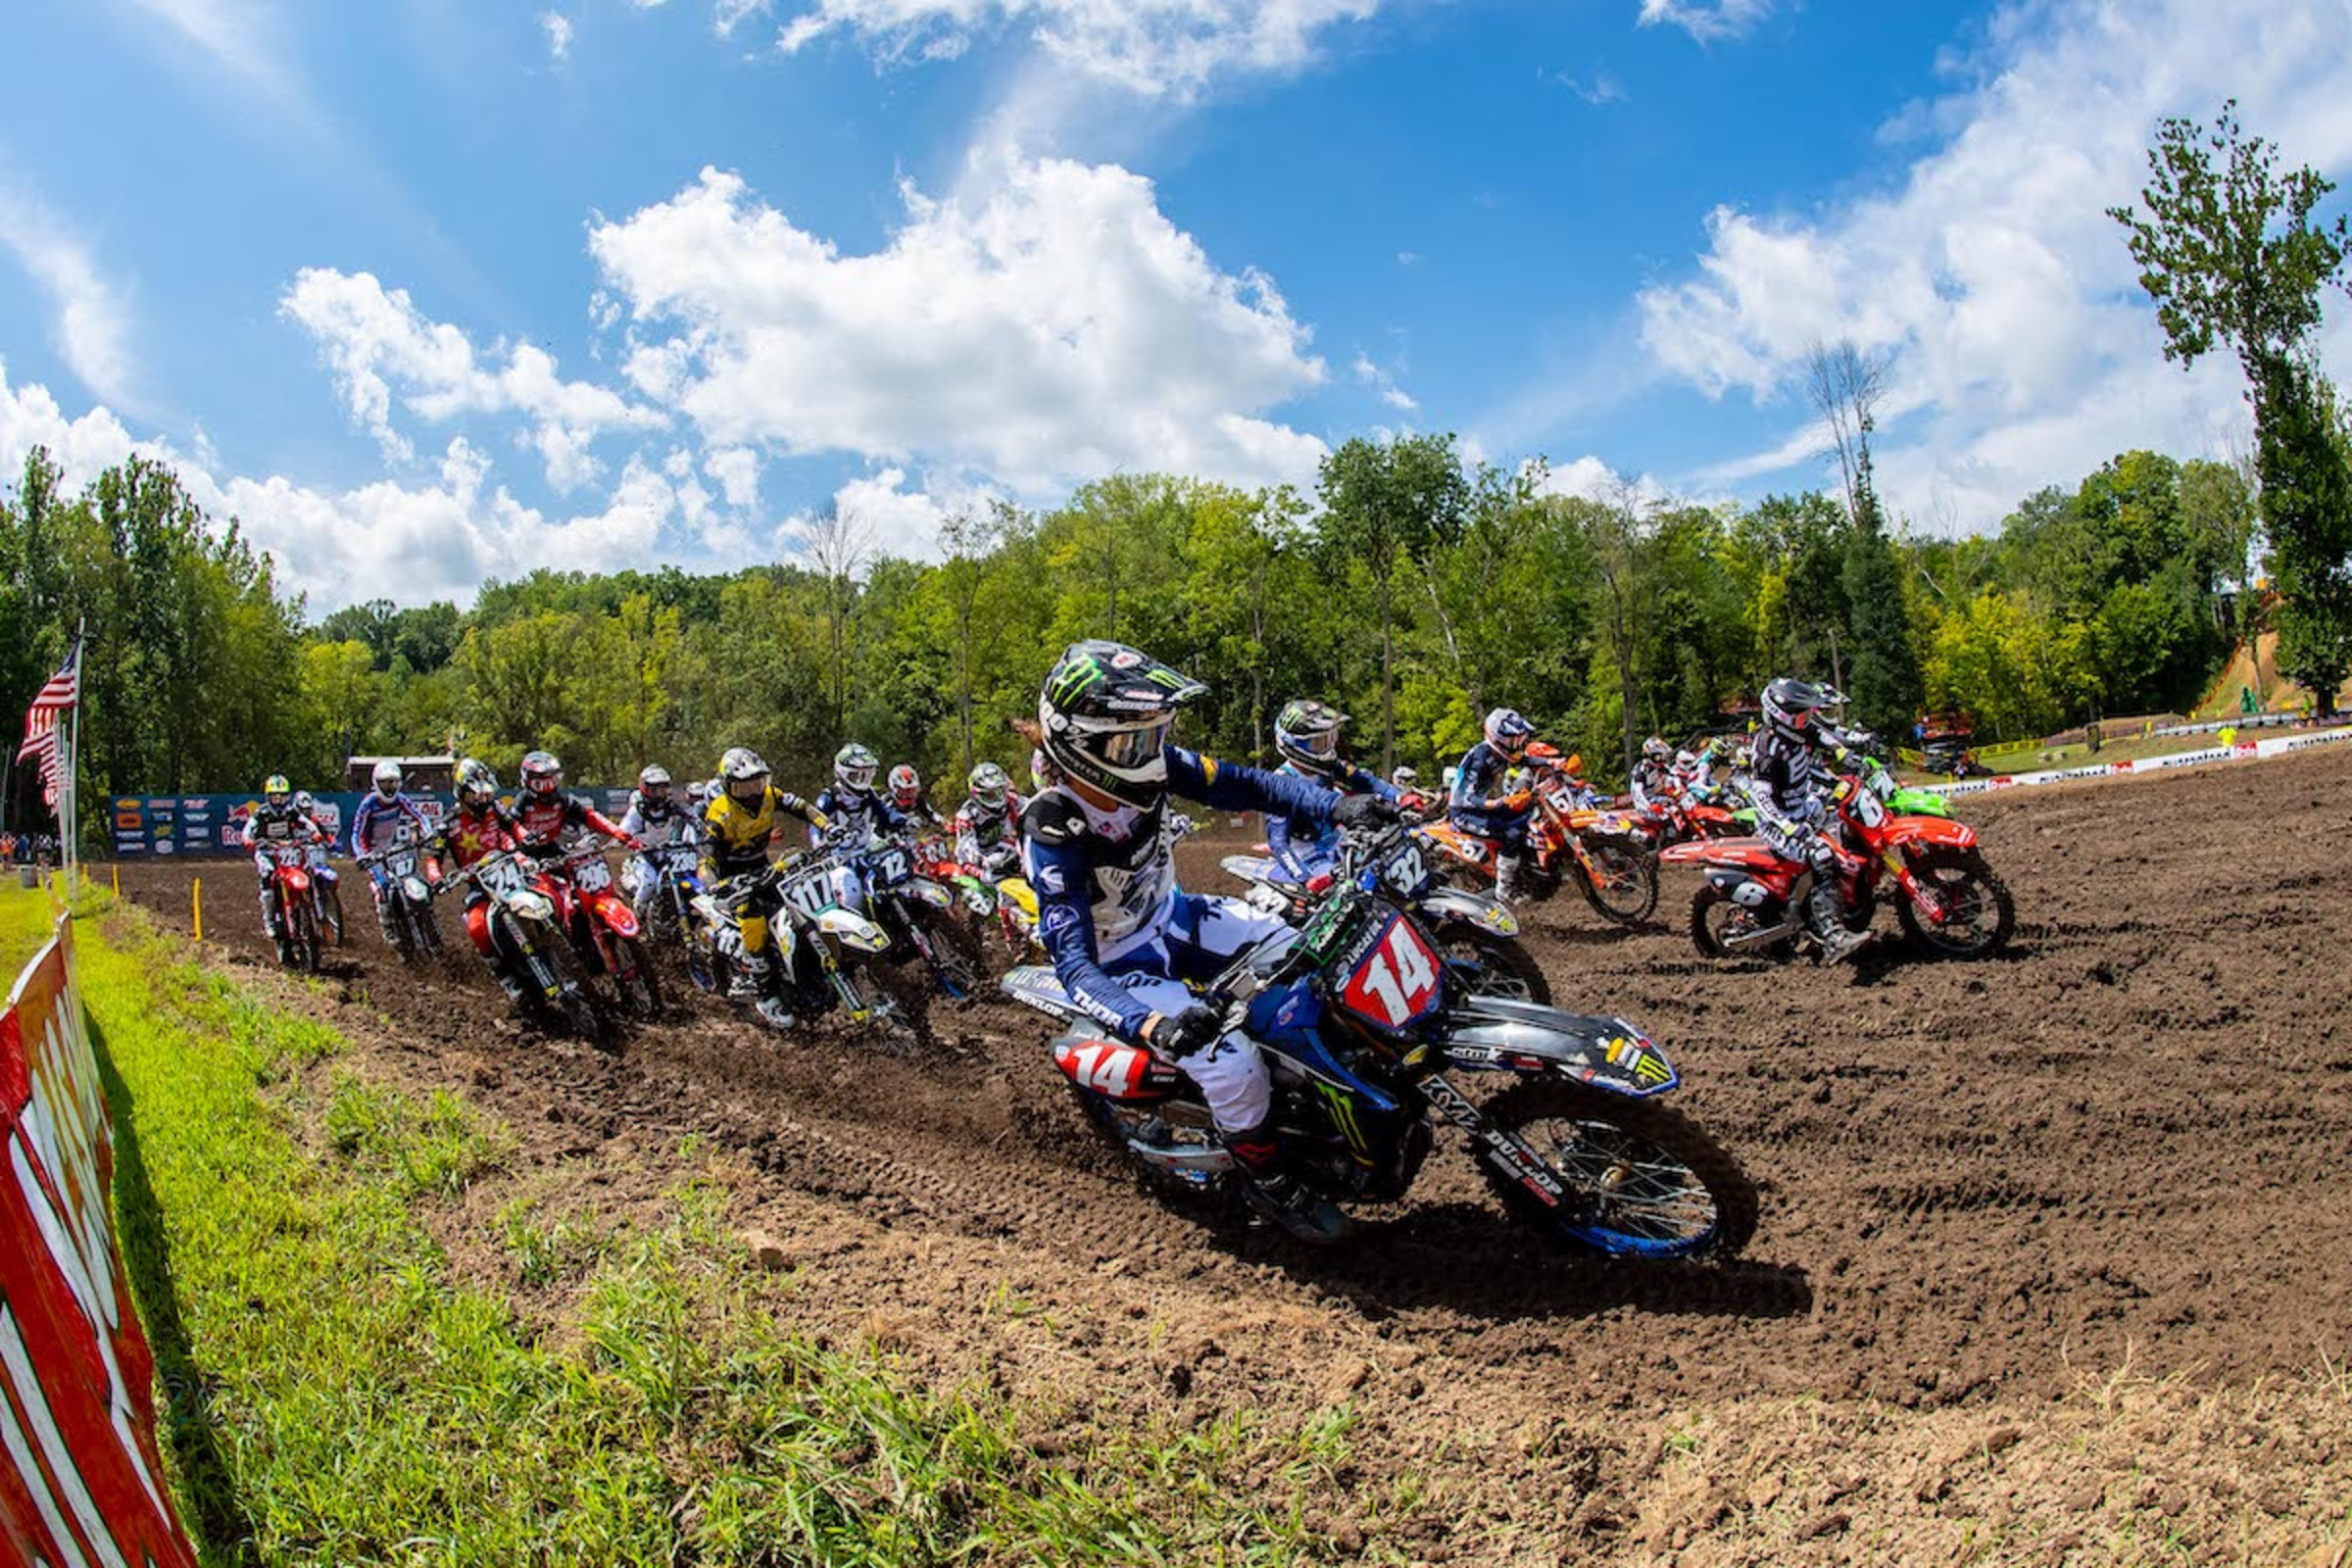 Free Official Pro Motocross App Updated for 2021 Season